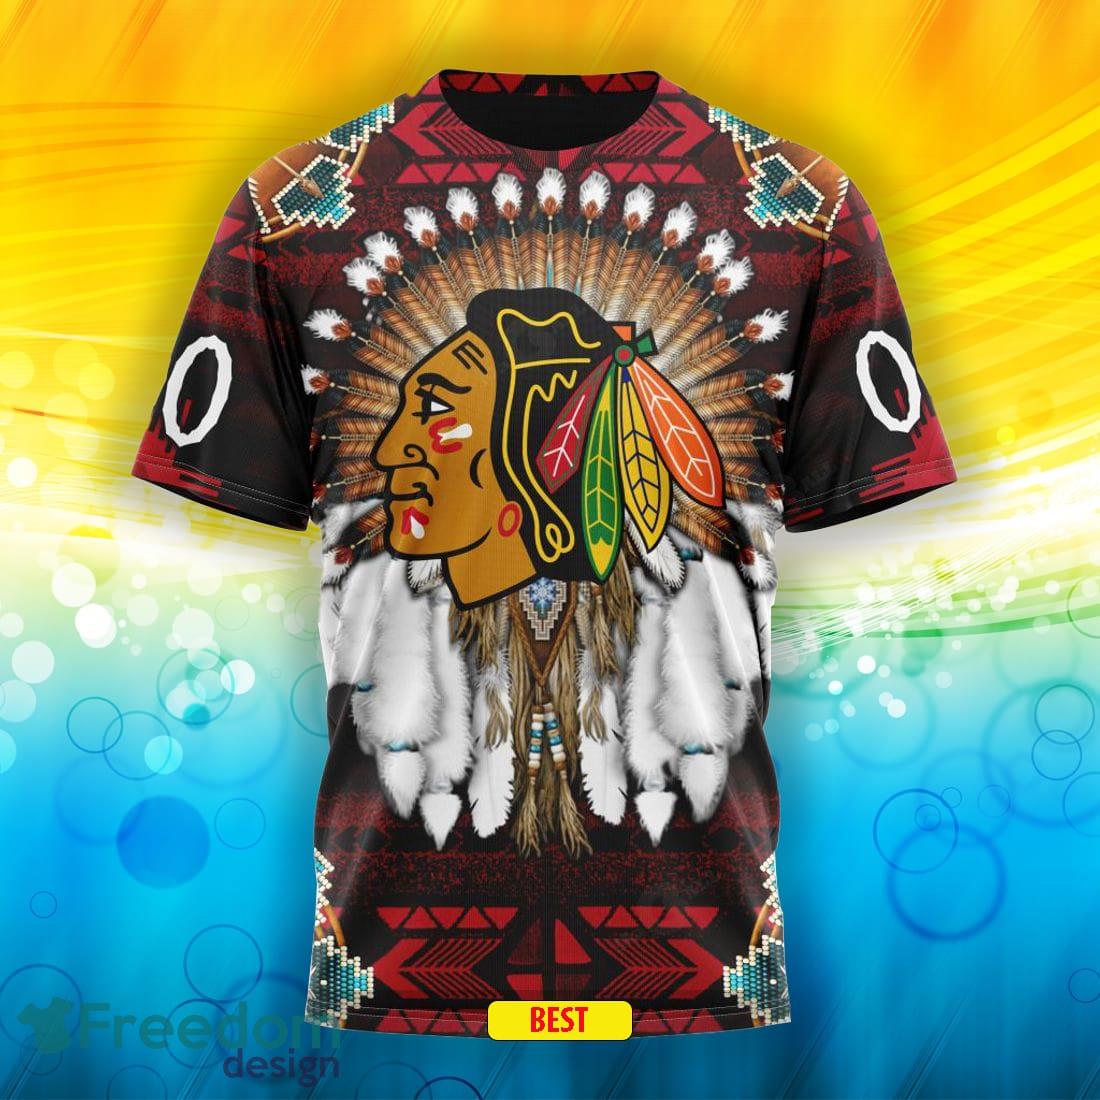 Personalized NHL Chicago Blackhawks Special Native Design Sweater Hoodie 3D  - Beetrendstore Store